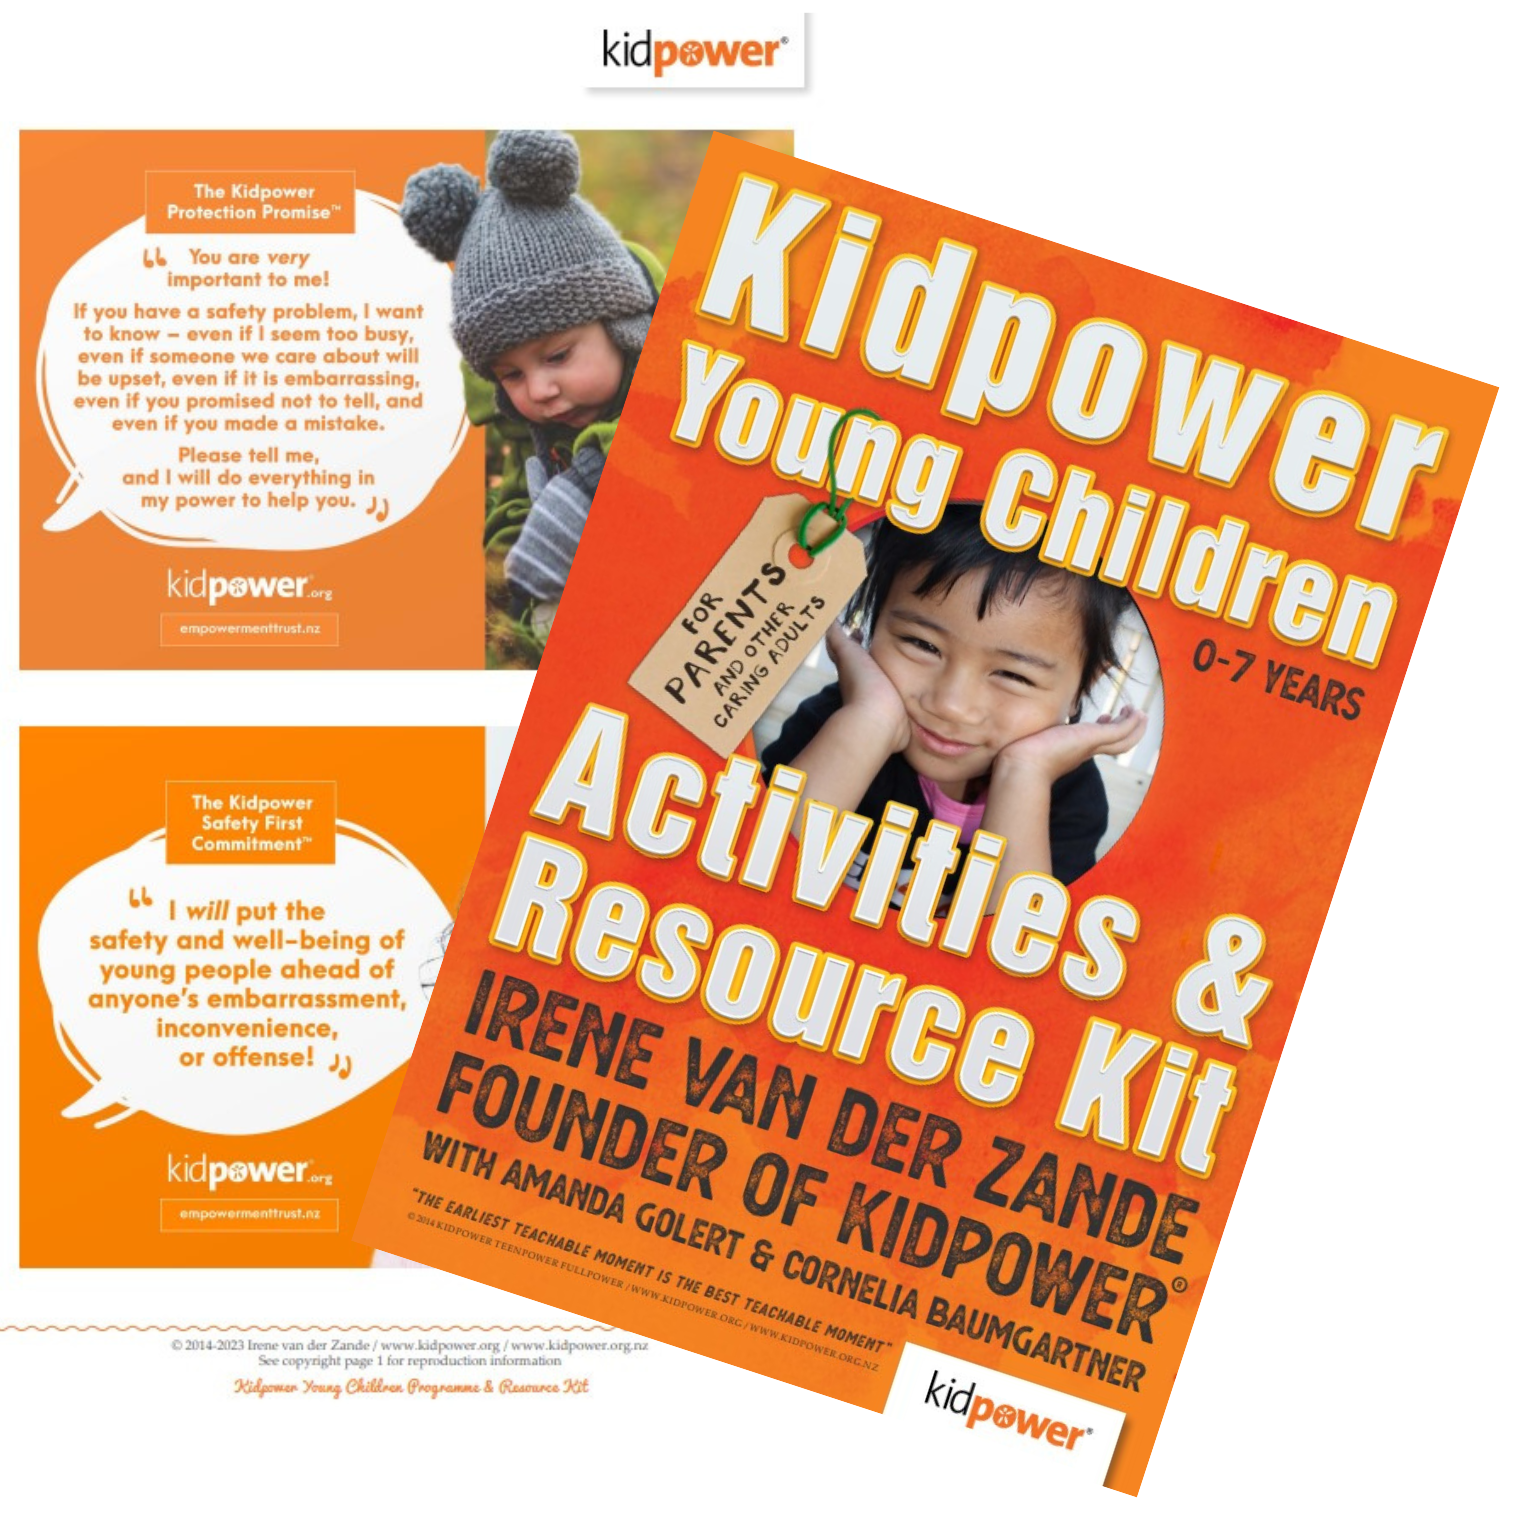 Kidpower for Young Children - Activities & Resource Kit  for Parents, Caregivers and other caring adults DIGITAL VERSION